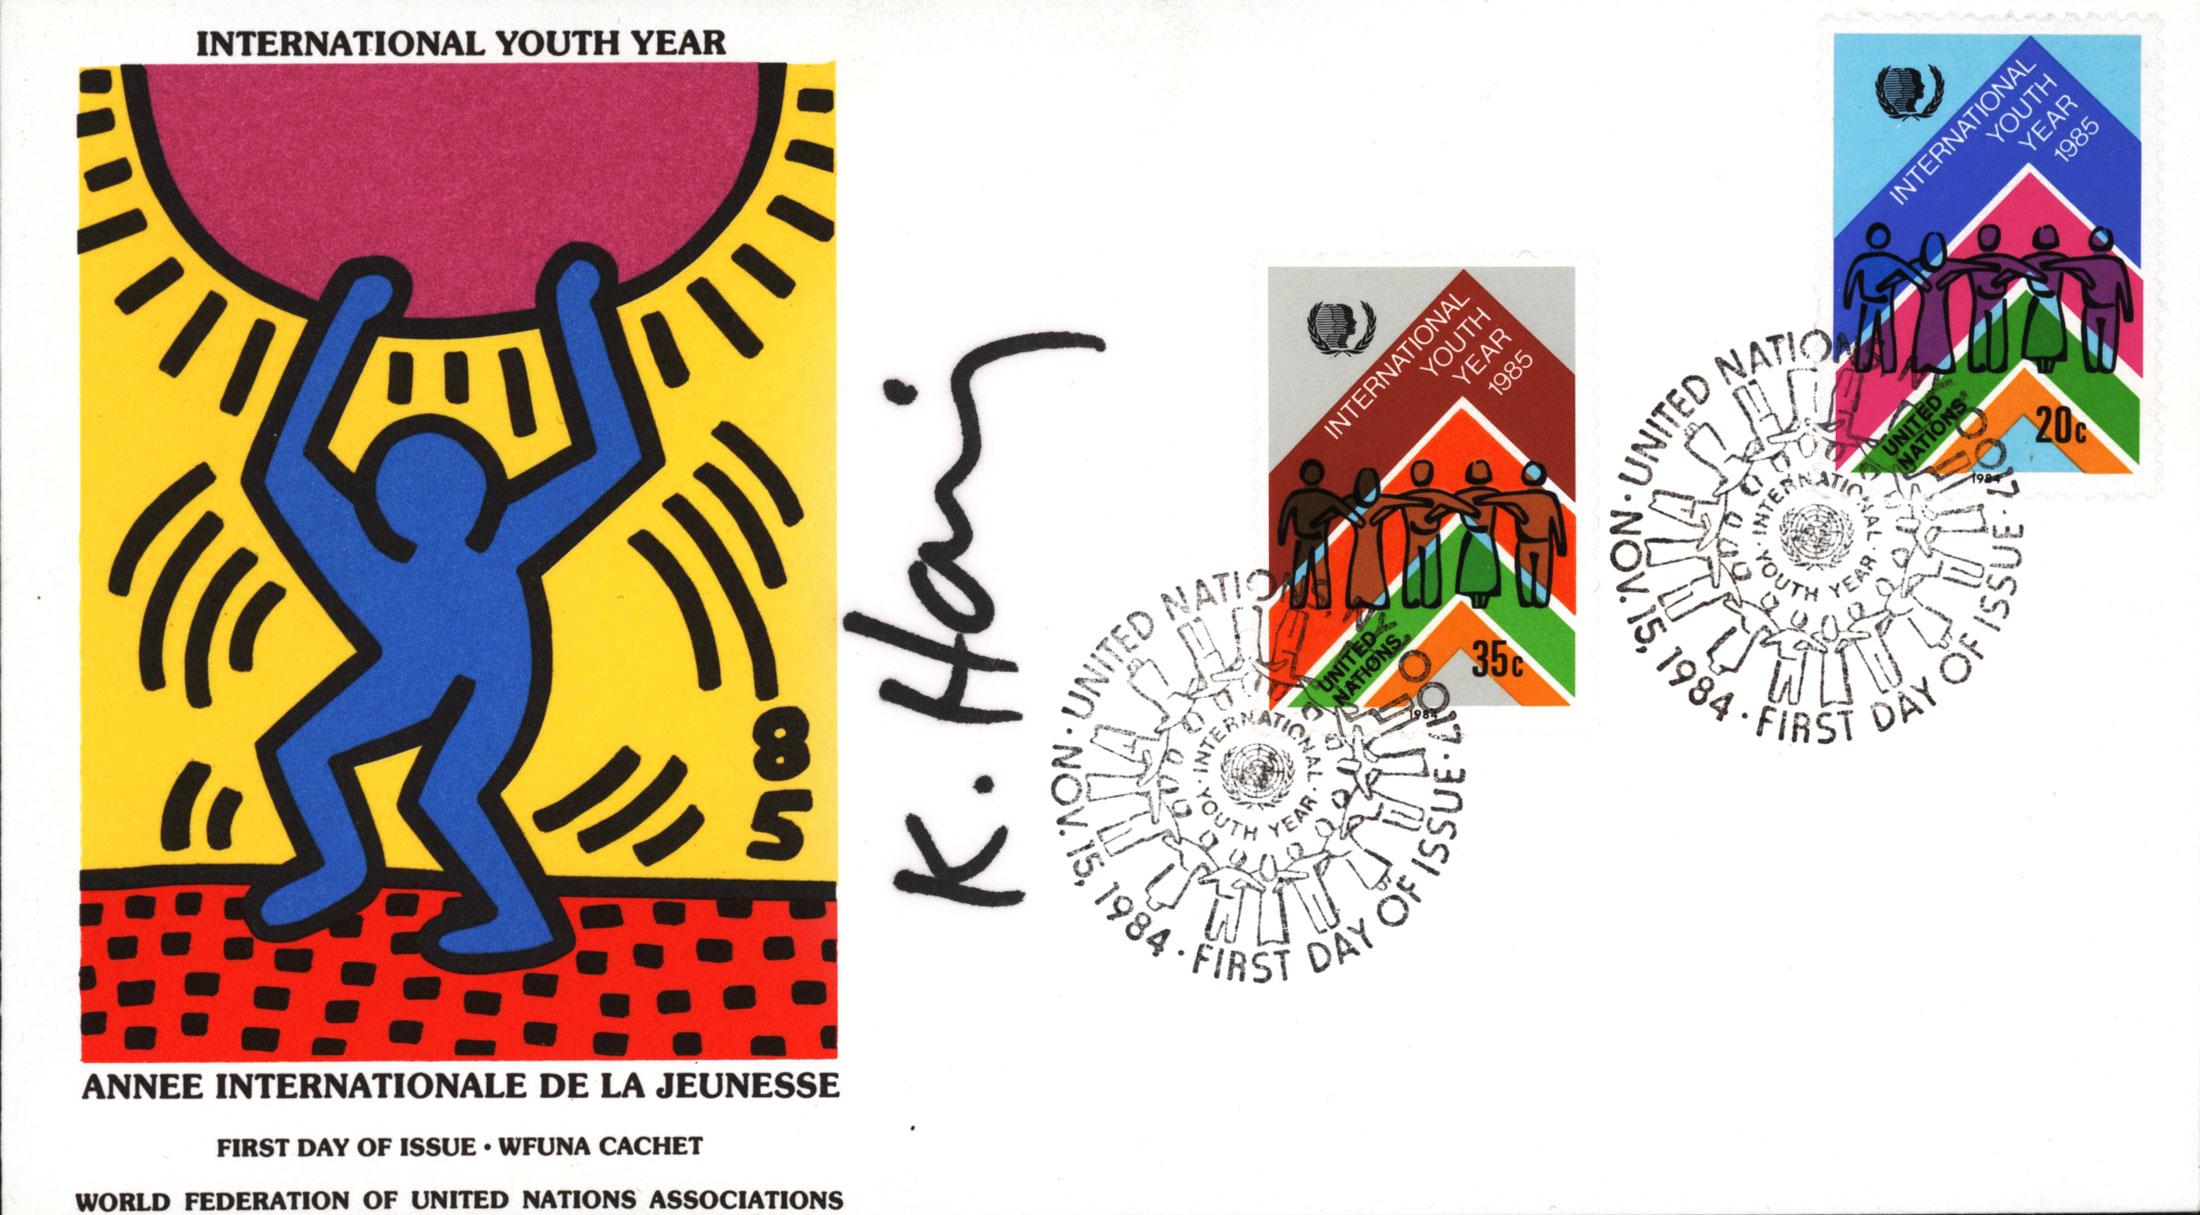 Keith Haring International Youth Year 1985 (signé à la main) 1